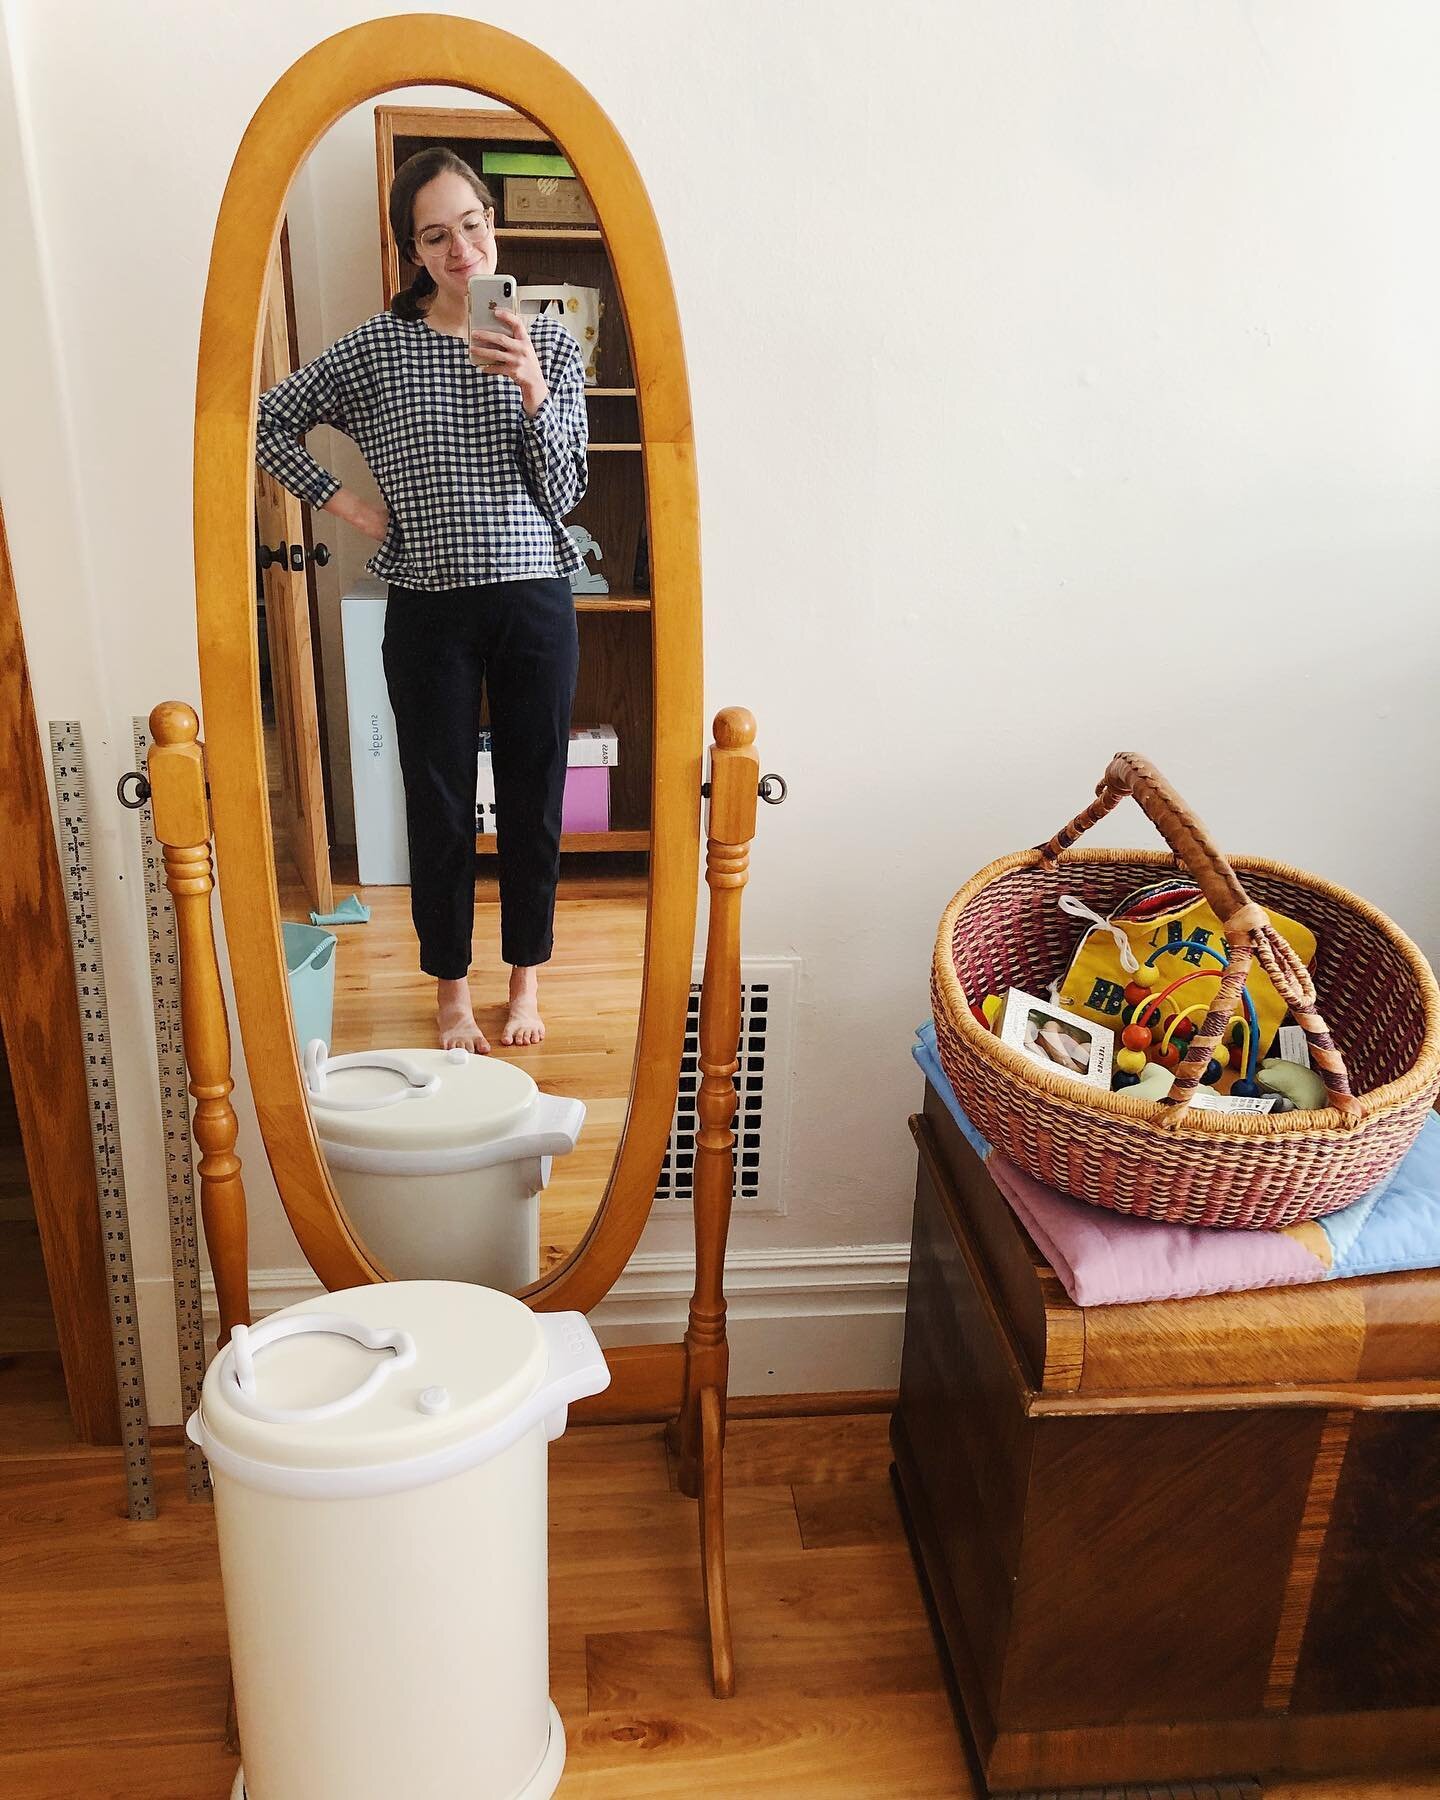 hi! 👋 30 weeks pregnant + wearing an old favorite #allwellboxtop and the only pants I own that are still comfy (secondhand @eileenfisherny !) + diaper pail + baby toys. switched the sewing room into the nursery last weekend, somehow consolidated all